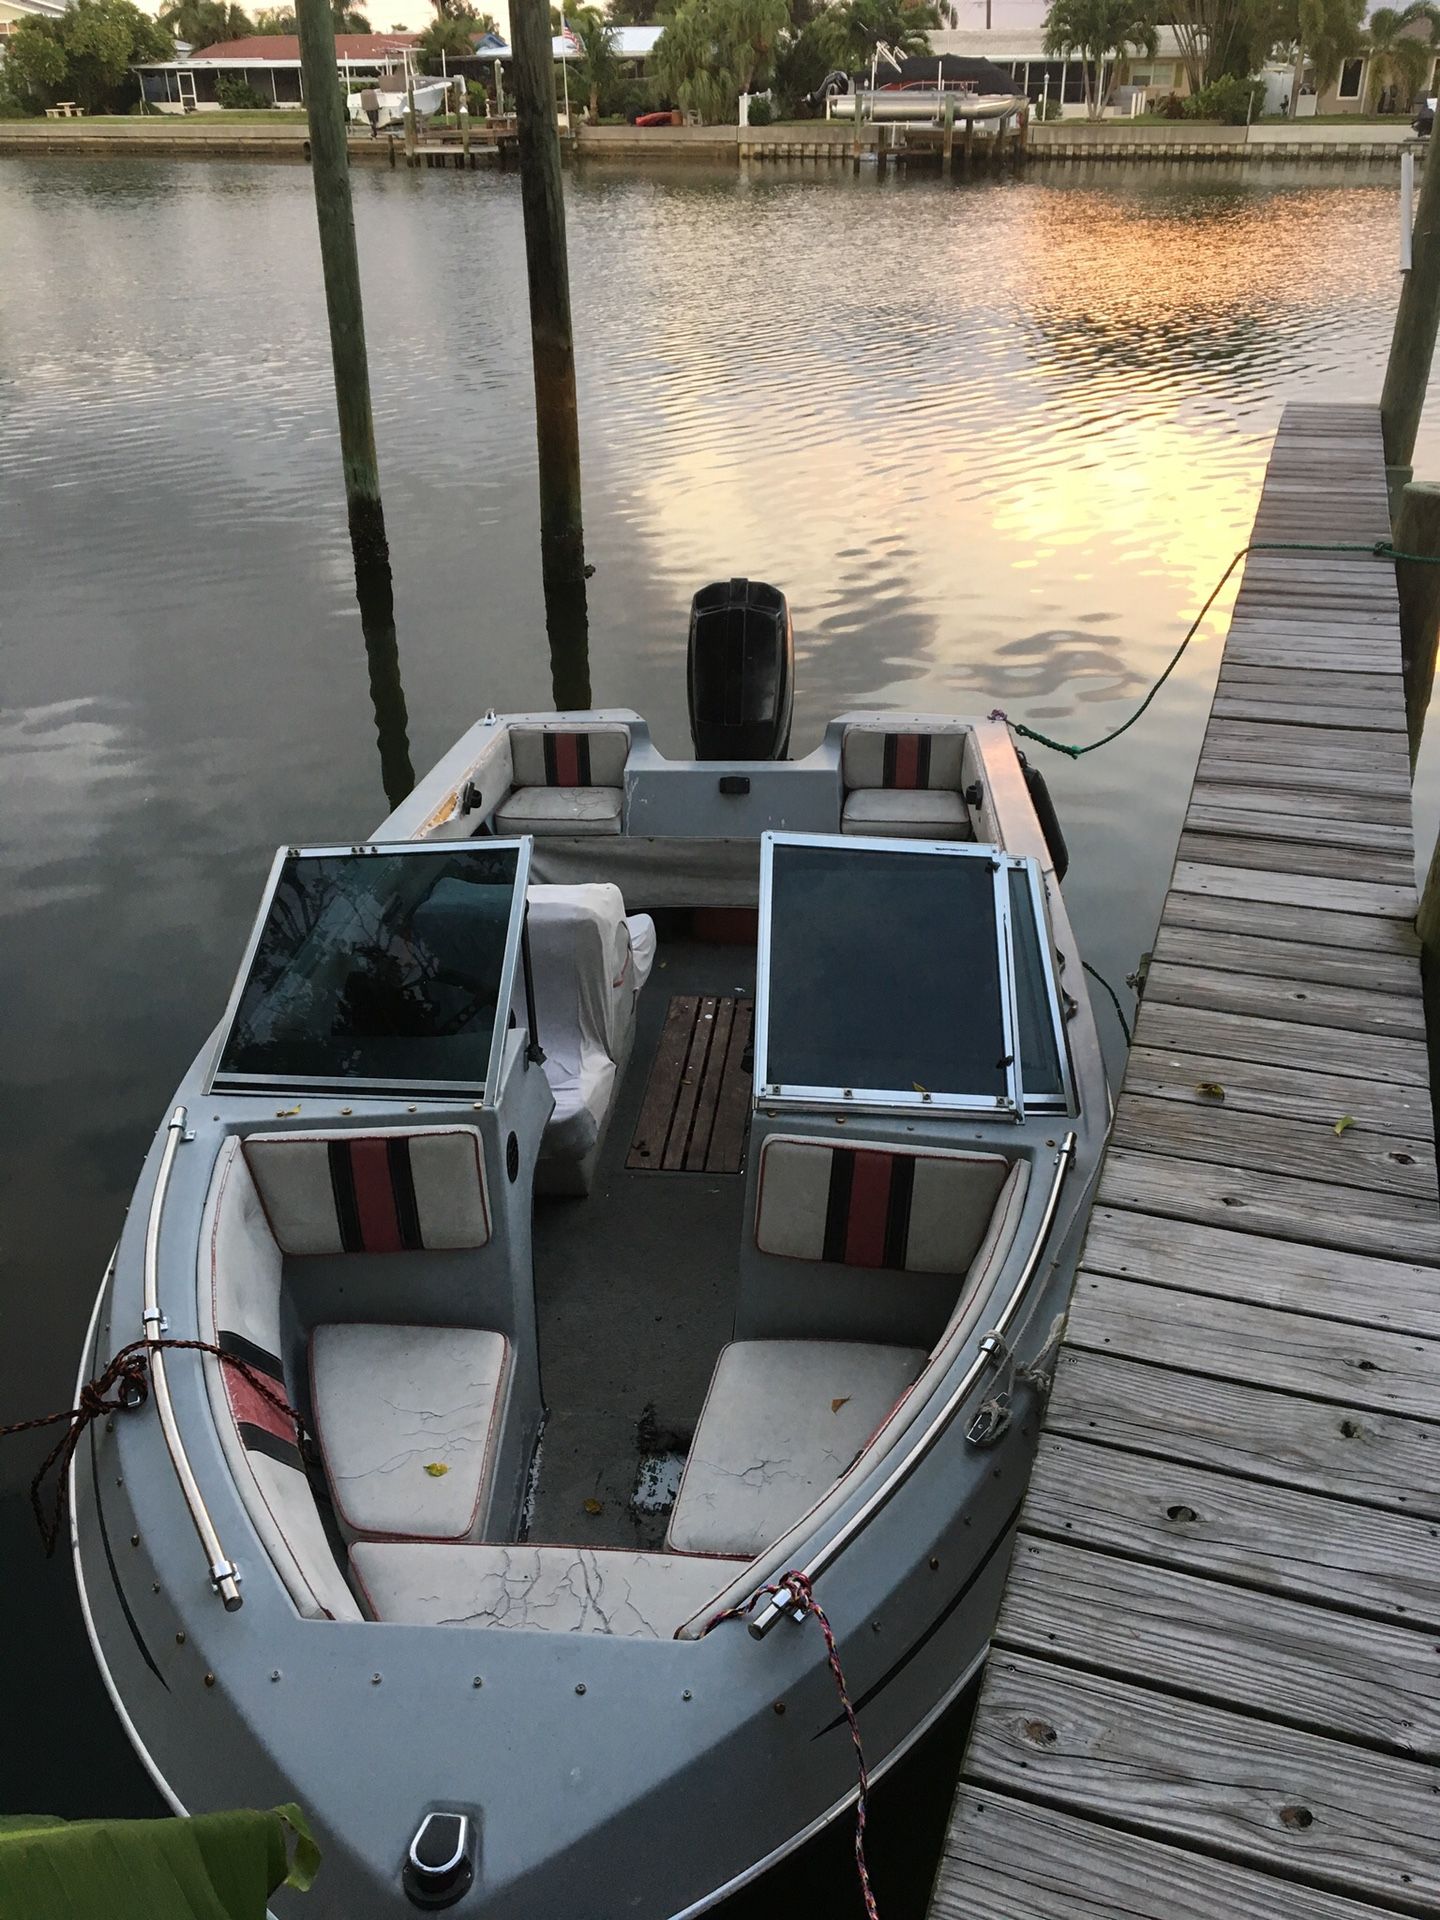 1989 Invader runabout open bow boat with 1990 70 hp mercury outboard motor